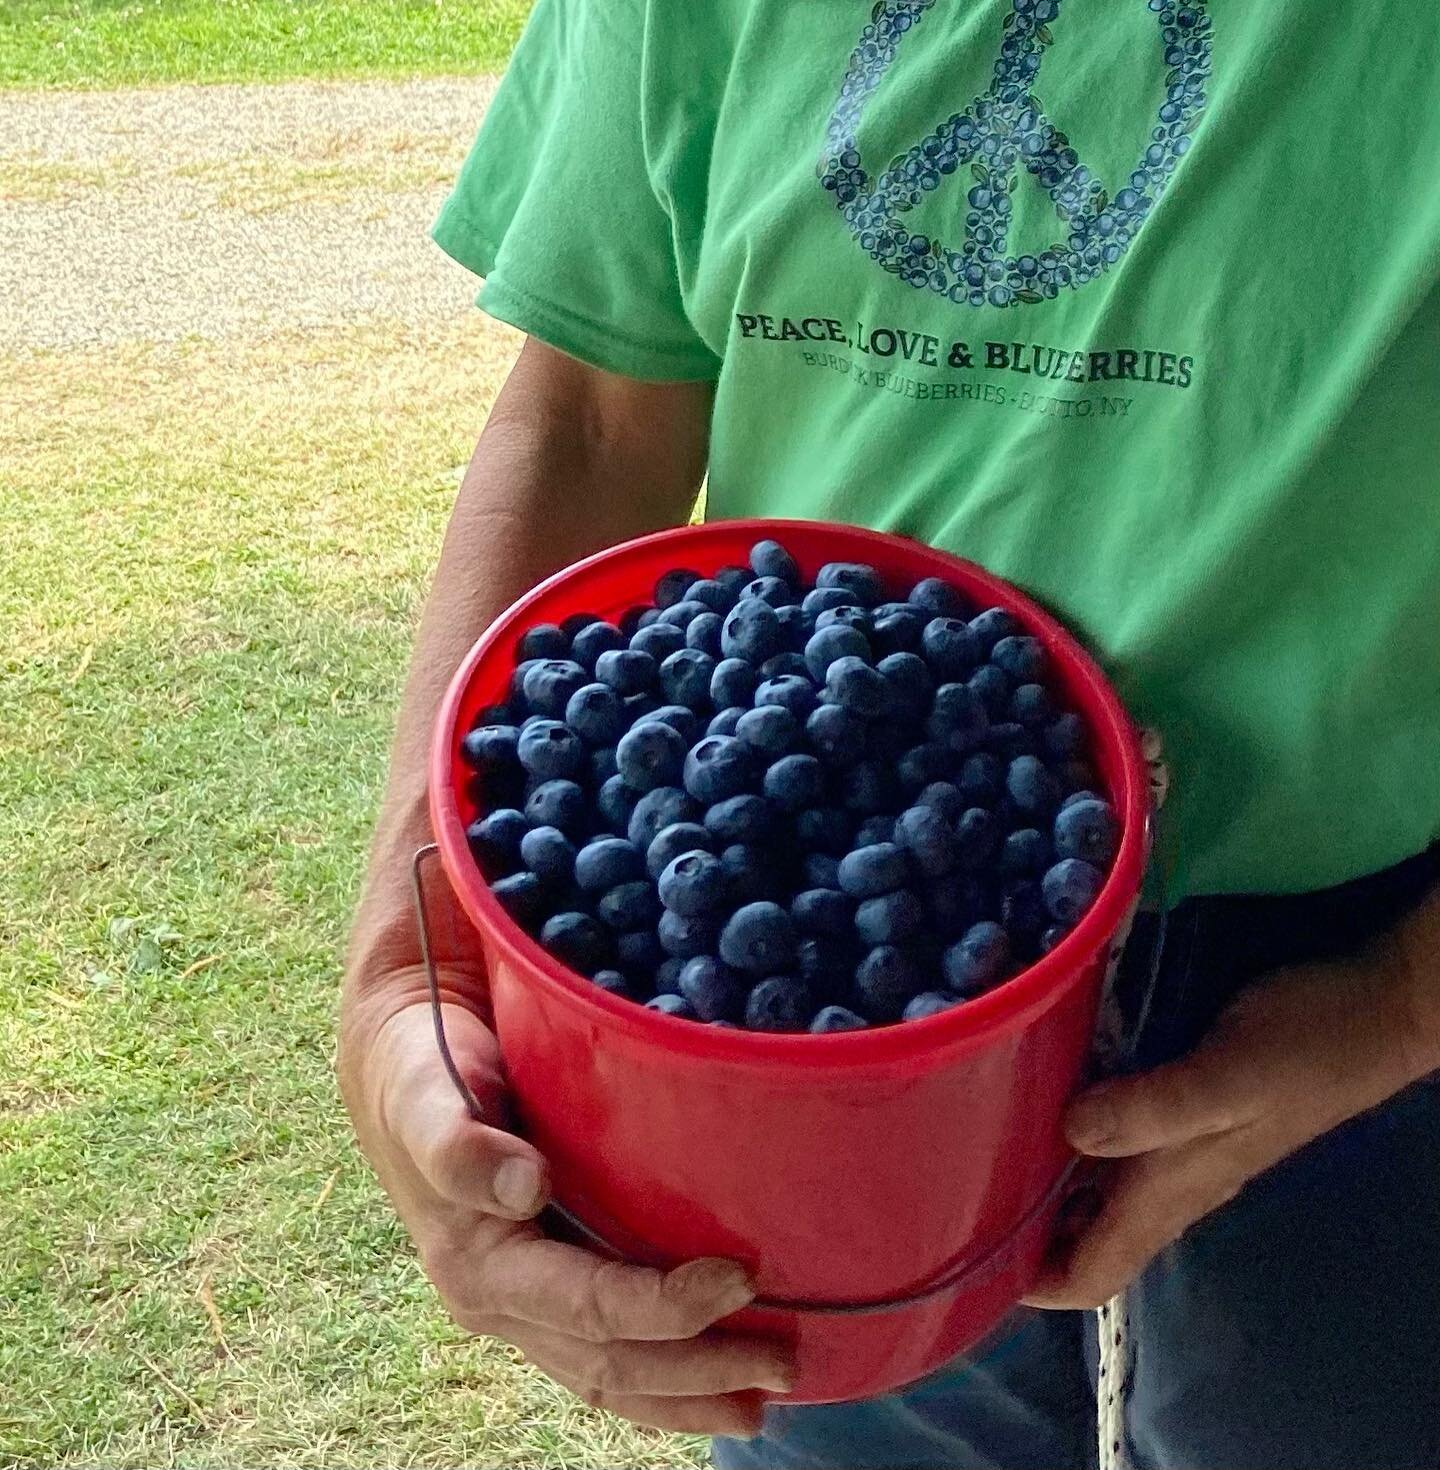 You all have been doing a lot of blueberry picking these last three weeks. No worries though &mdash;lots more of amazing berries ready to pick! 
￼#burdickblueberries #peaceloveandblueberries #WNY #pickyourown #blueberries